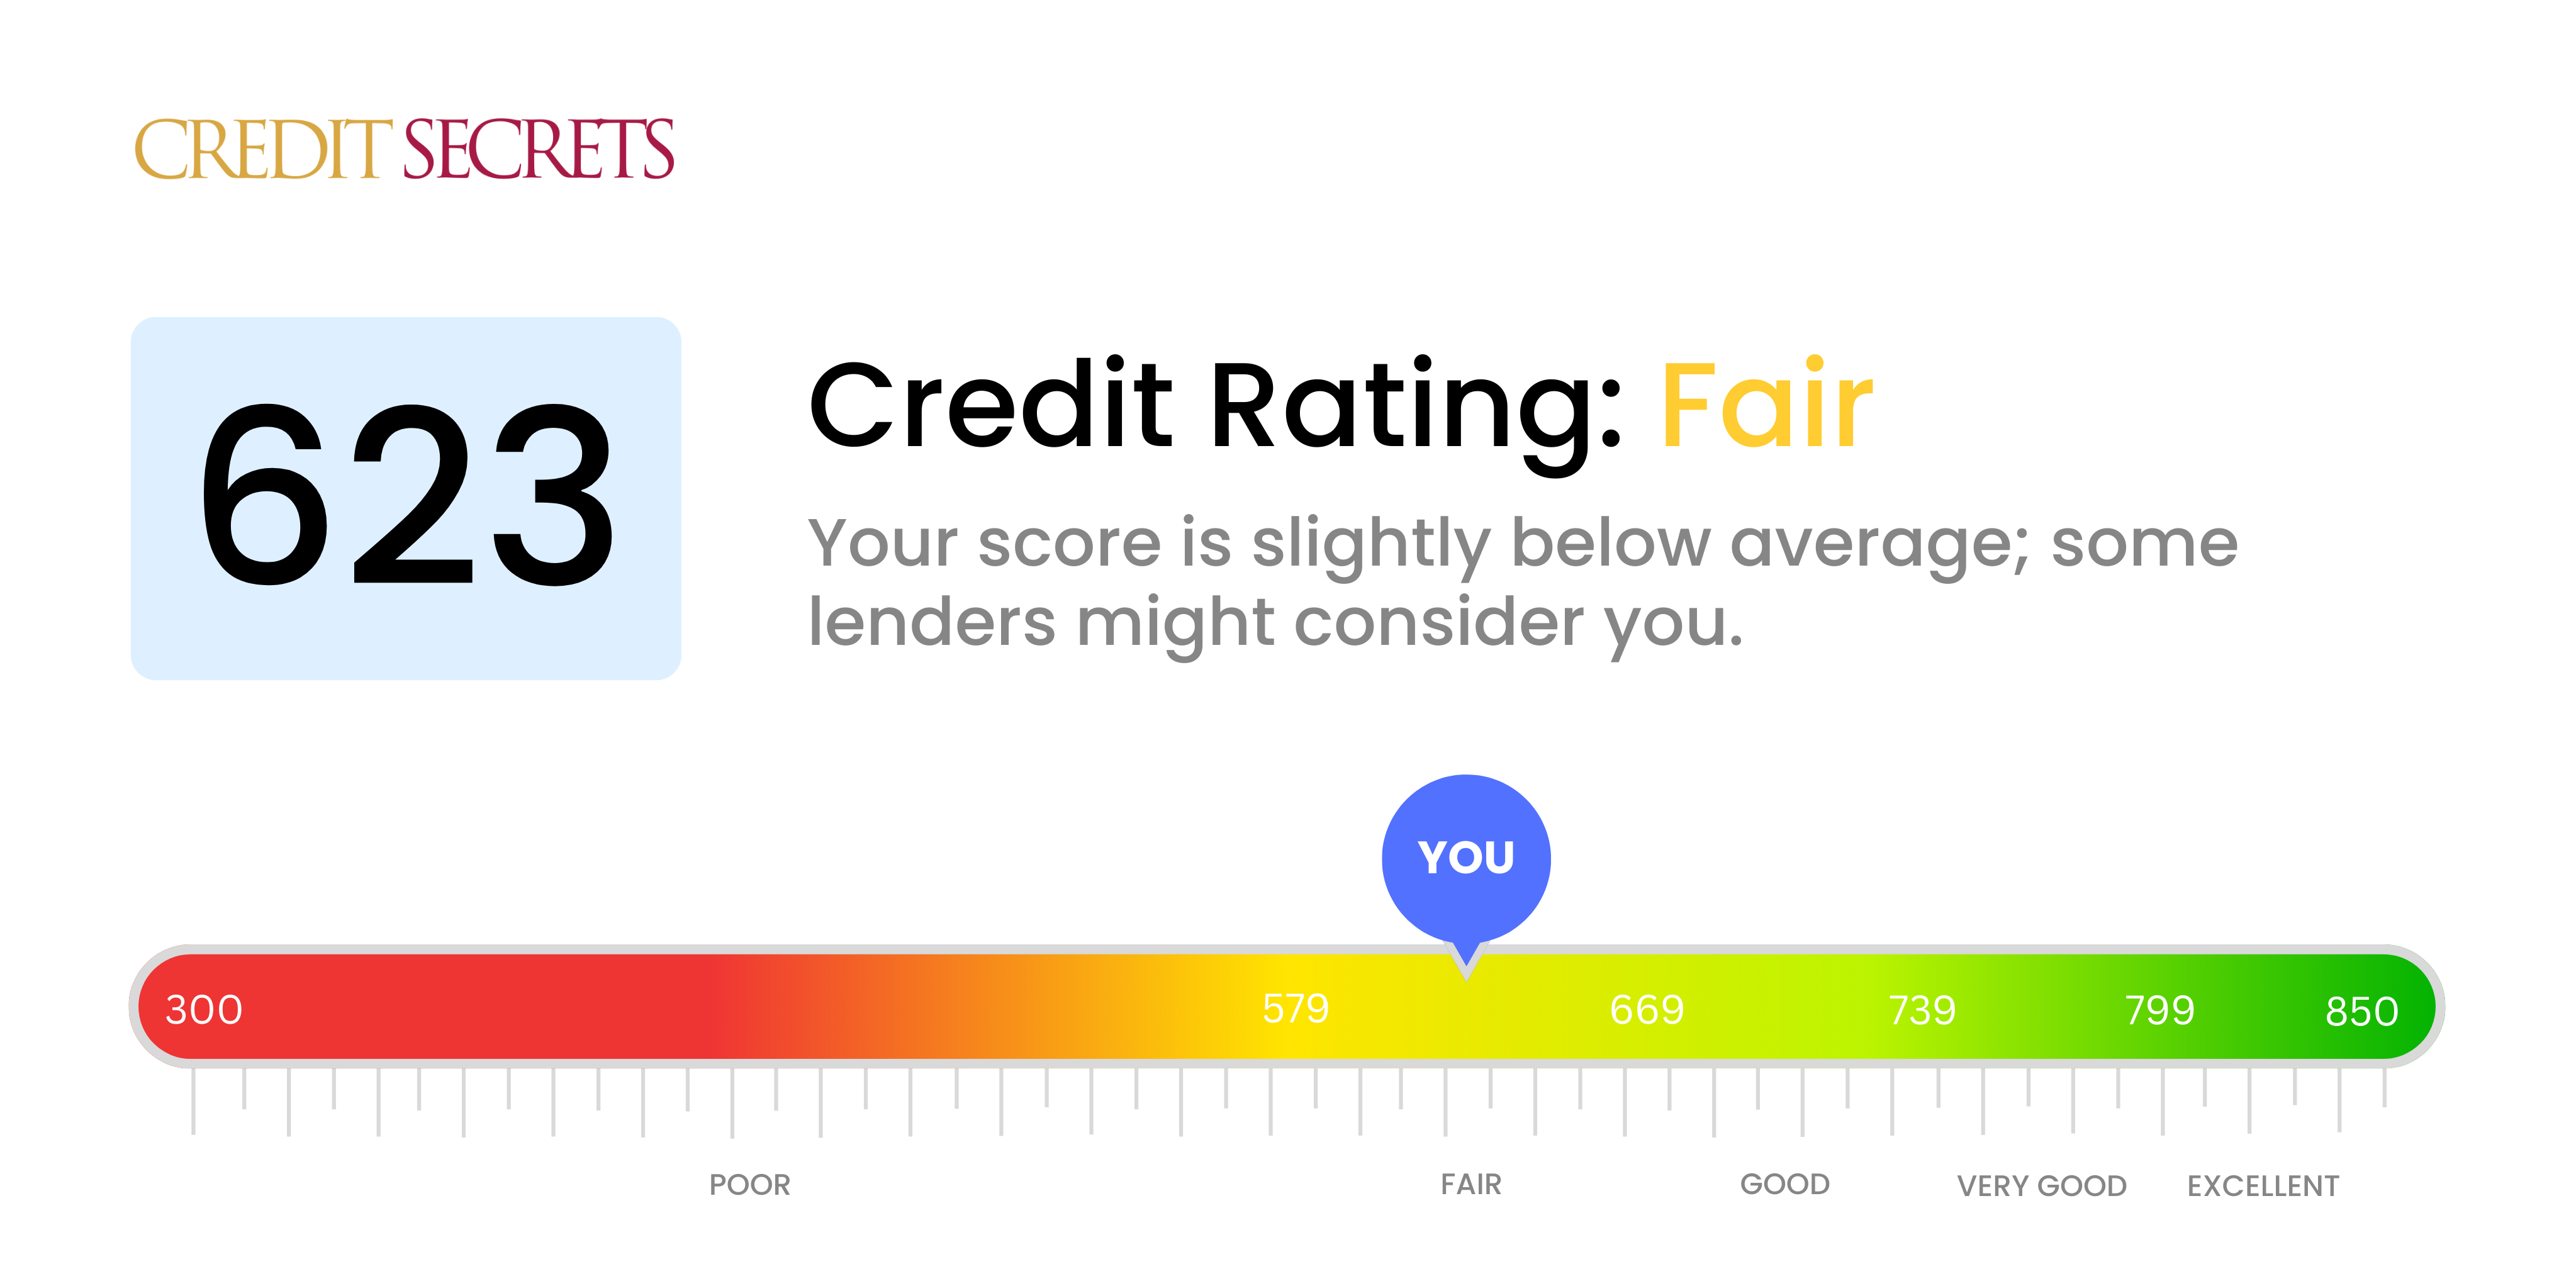 Is 623 a good credit score?